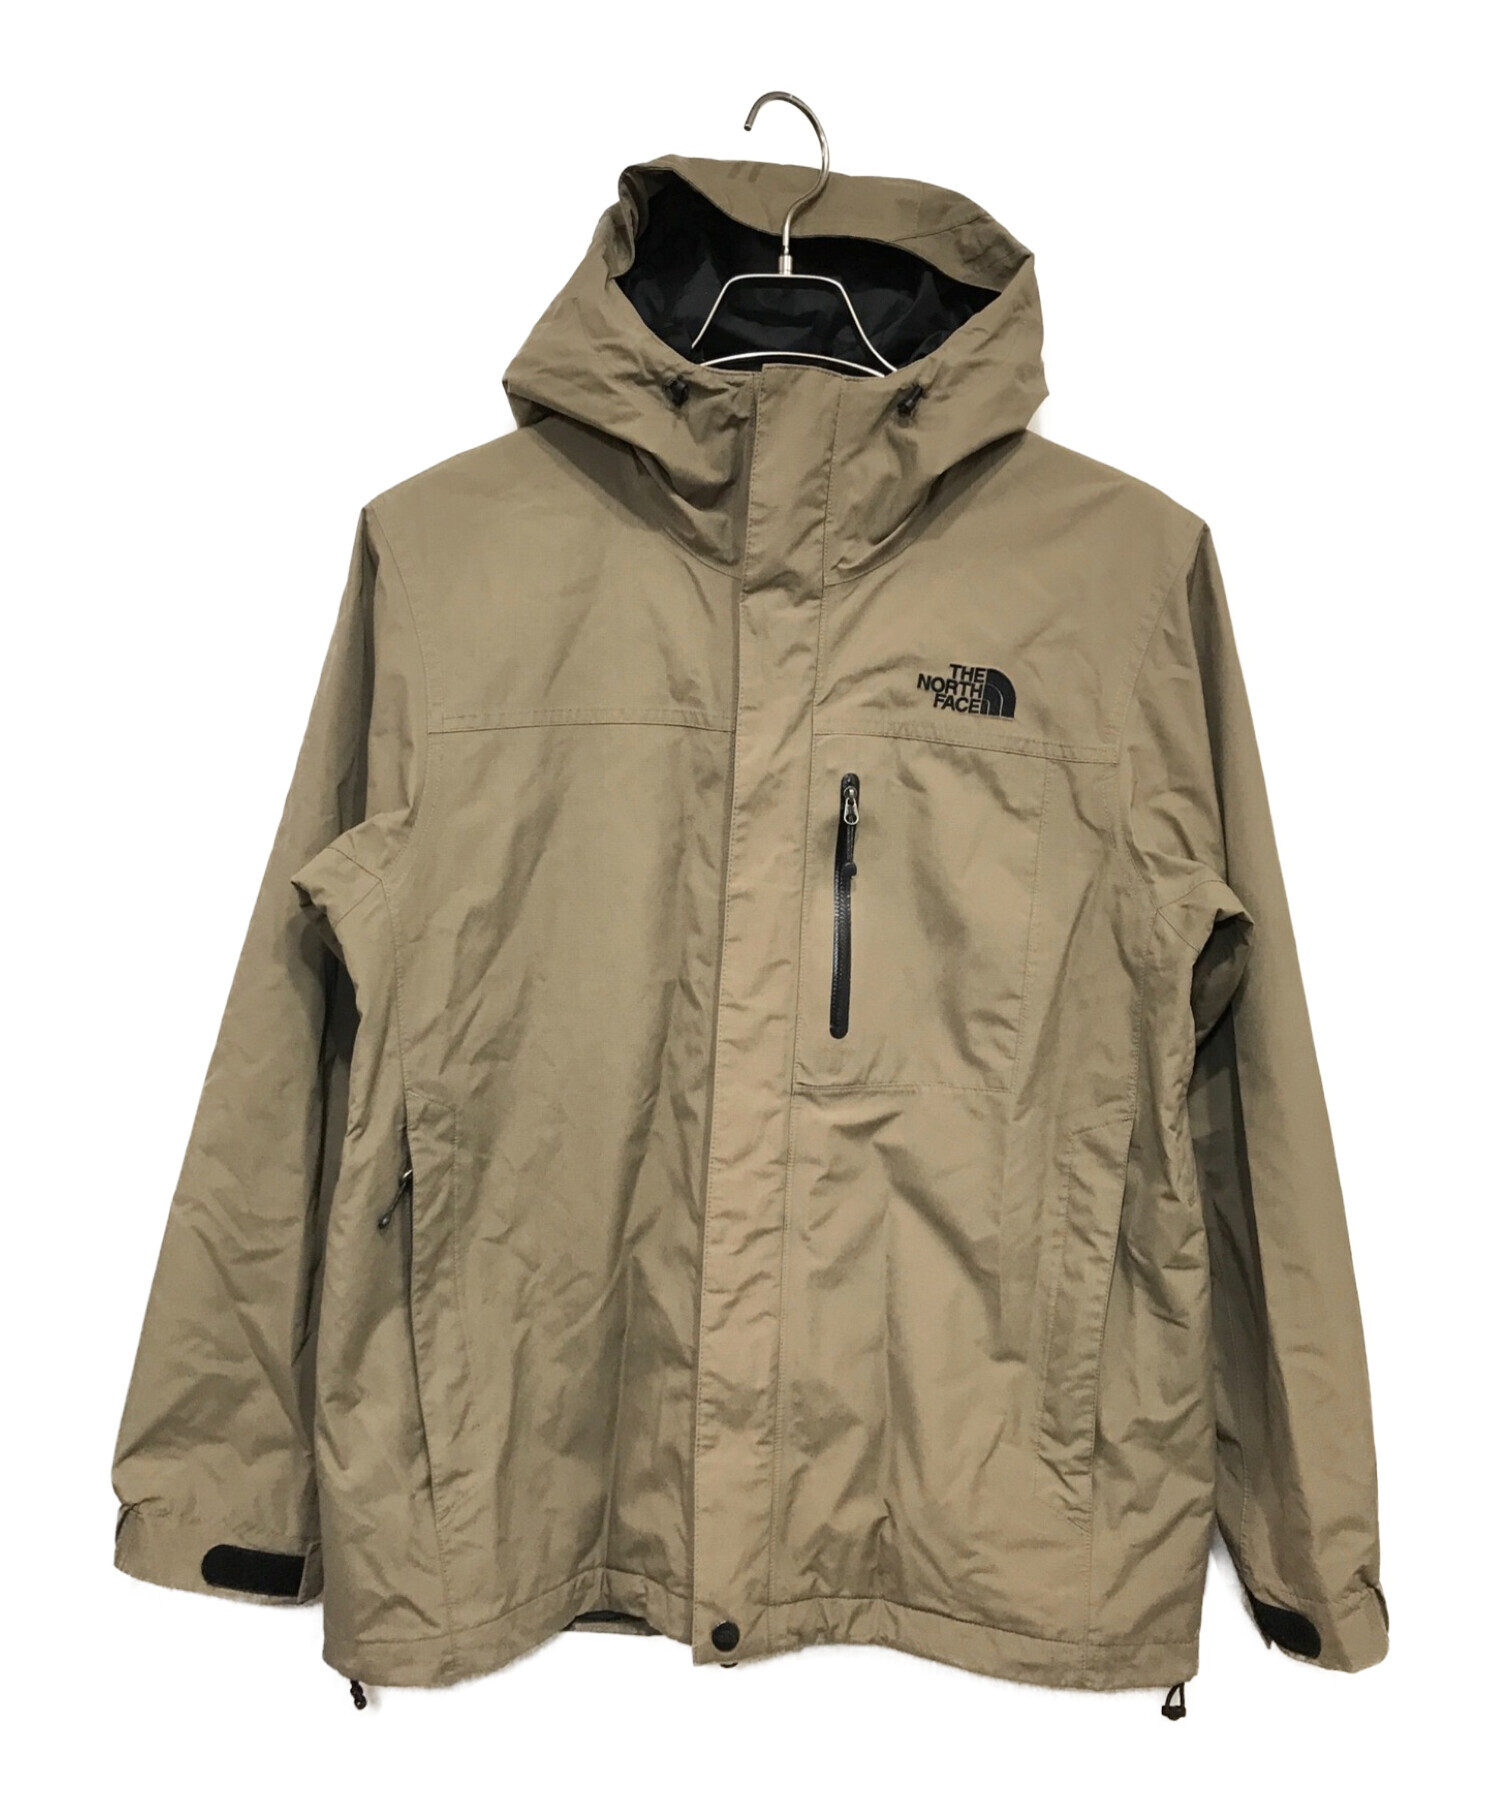 THE NORTH FACE ZEUS TRICLIMATE JACKETカラーグレー - マウンテンパーカー